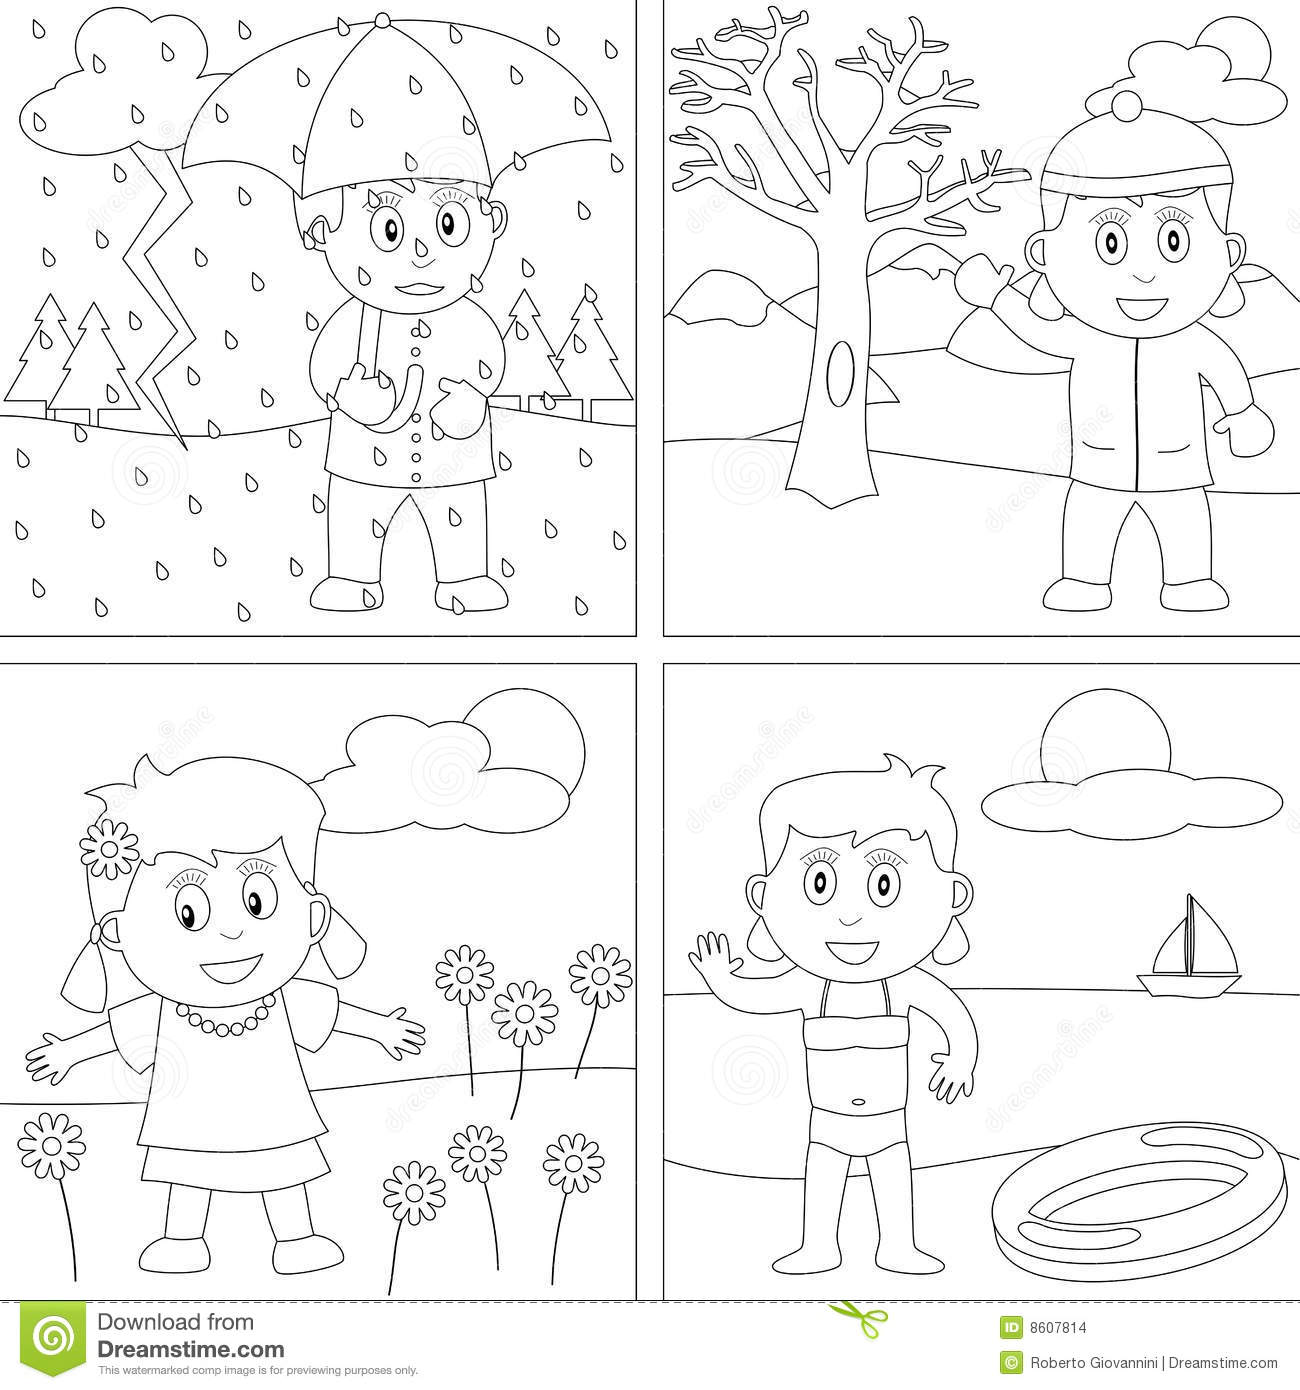 printable-four-seasons-coloring-pages-printable-word-searches